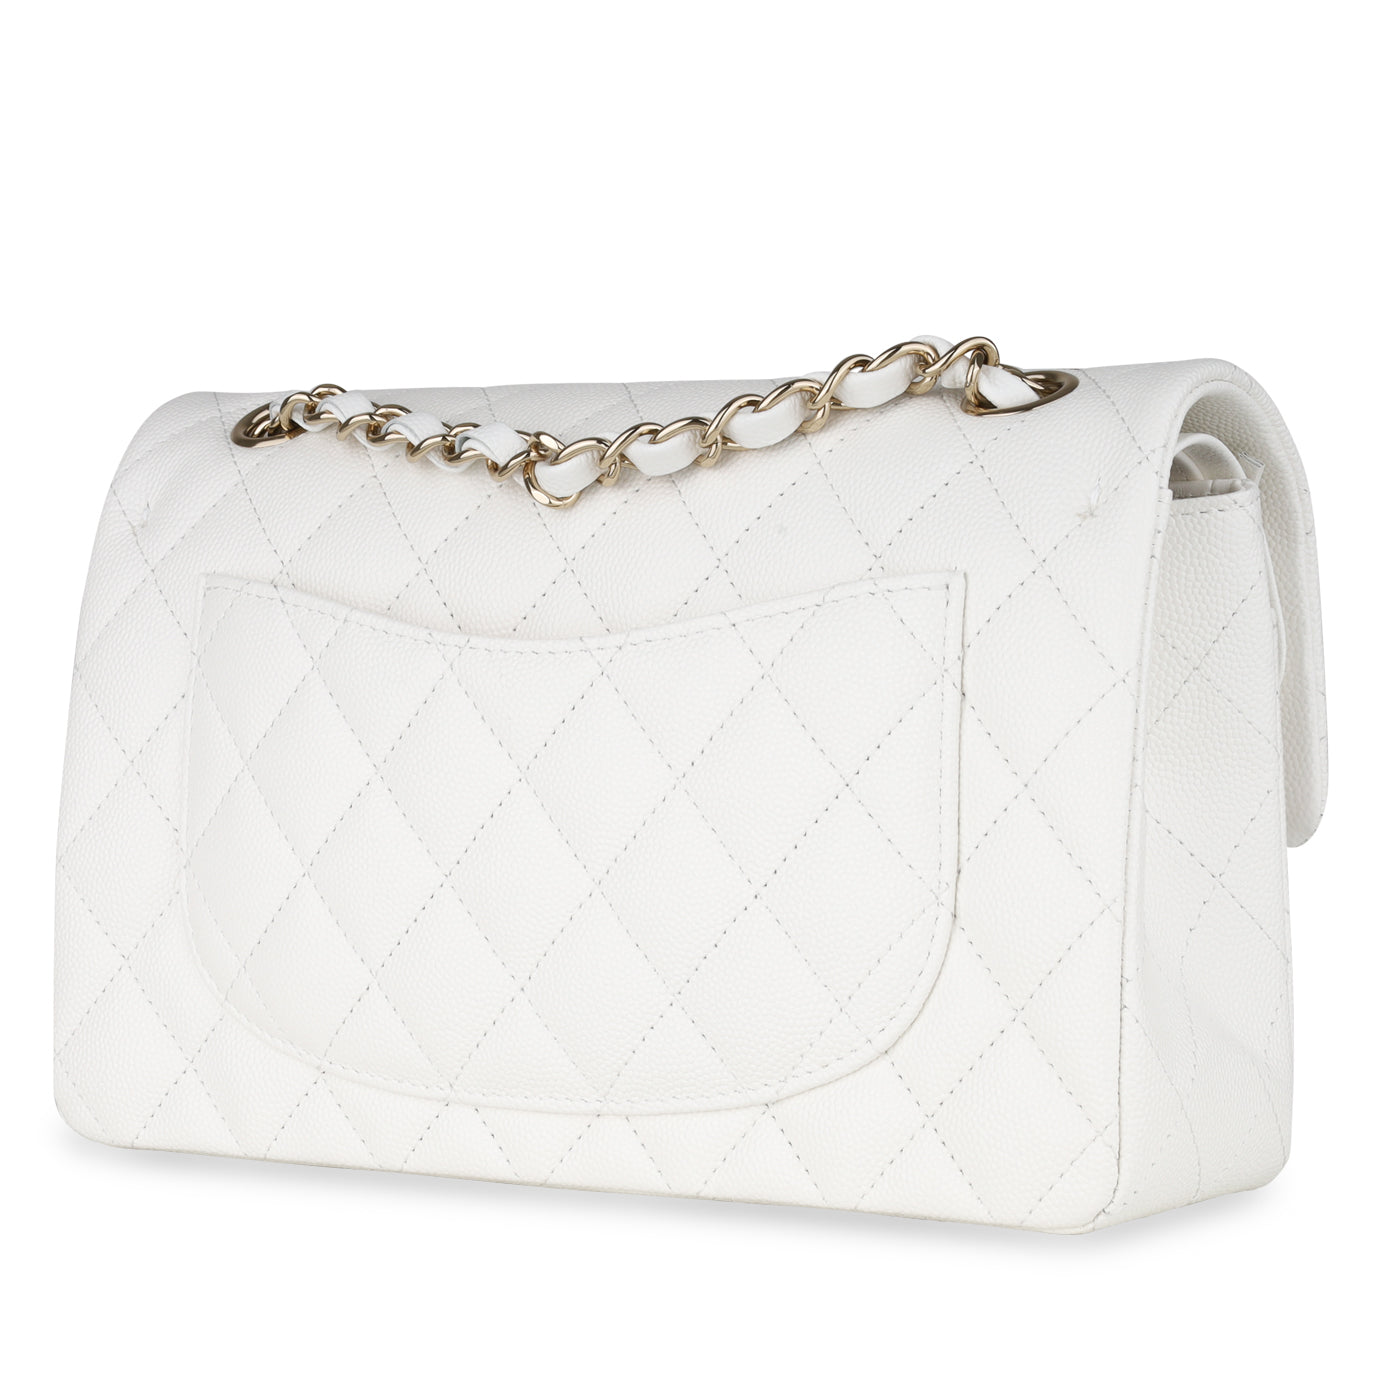 Chanel Small Classic Flap - White Caviar - CGHW - Brand New